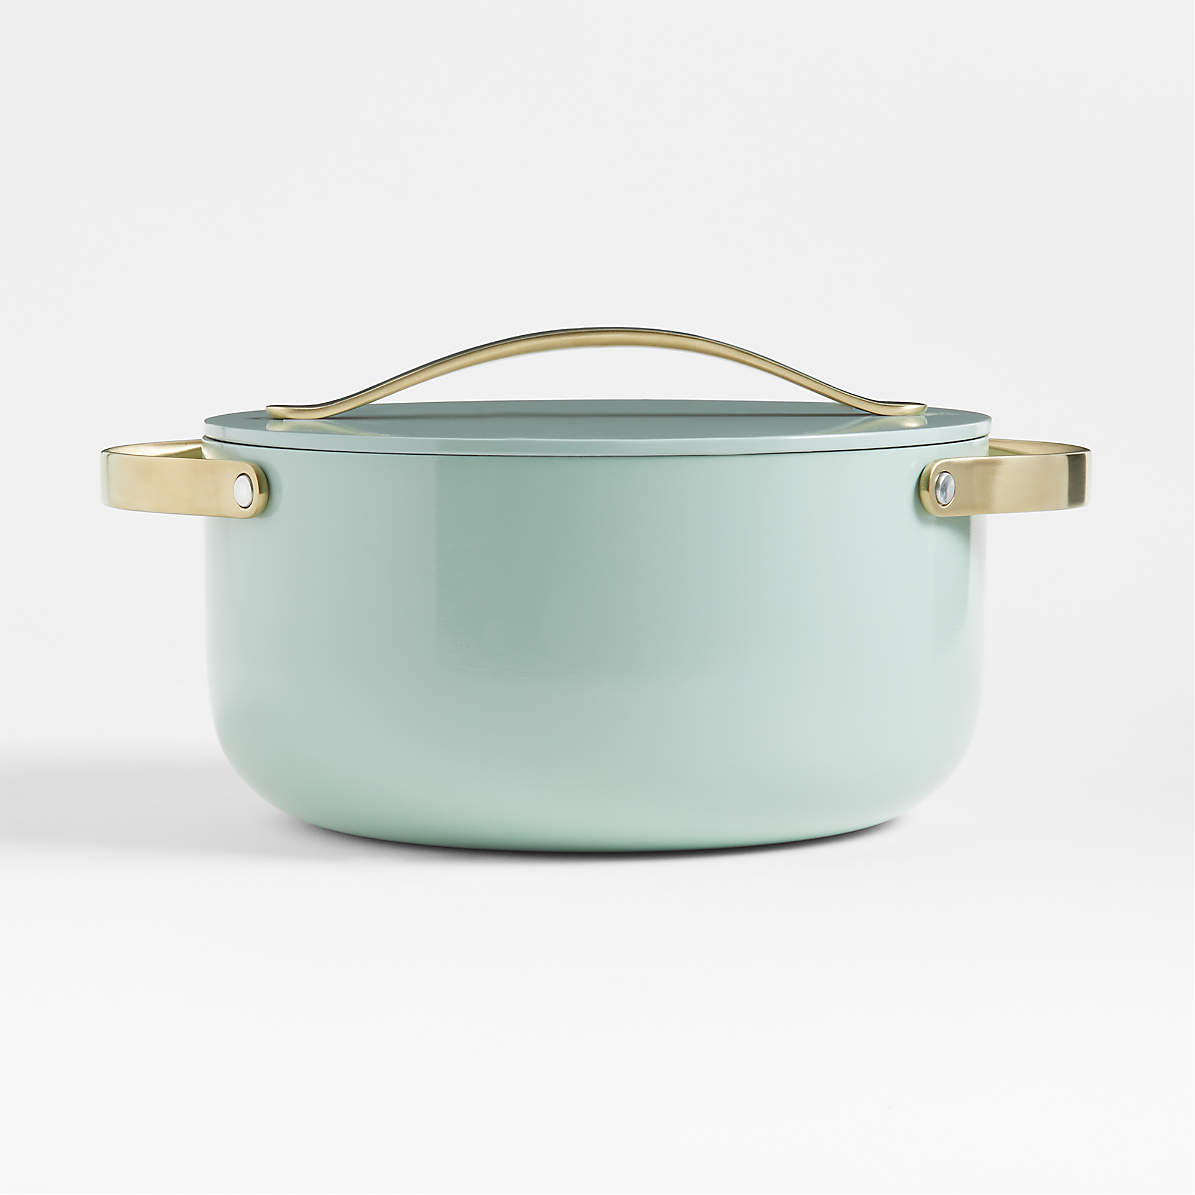 Caraway - #tbt to our Silt iconic Green Cookware Set with